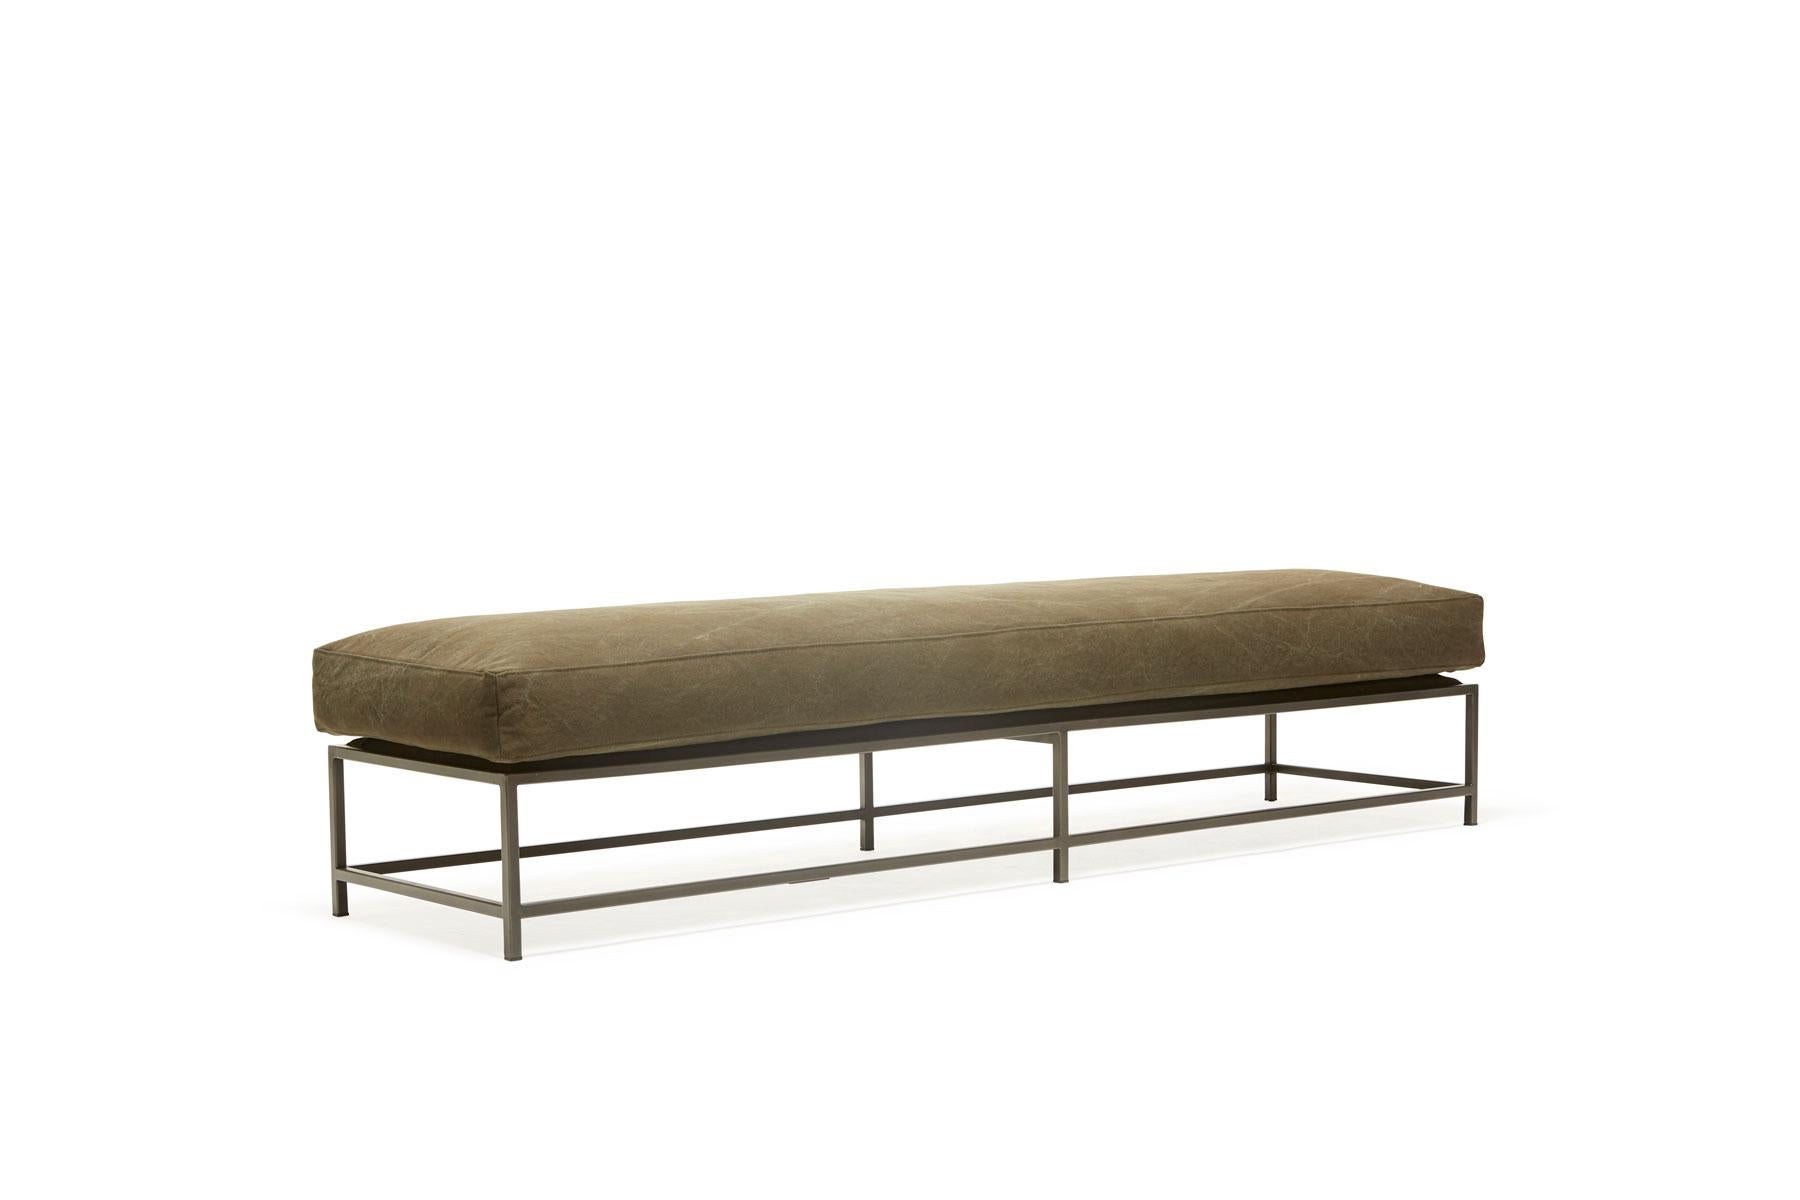 The Inheritance Bench can be used as a chaise extension on the sofa or two-seat sofa, as an independent seating option, or as a large upholstered coffee table in front of a sofa or chair. This version has a blackened steel frame finish and is